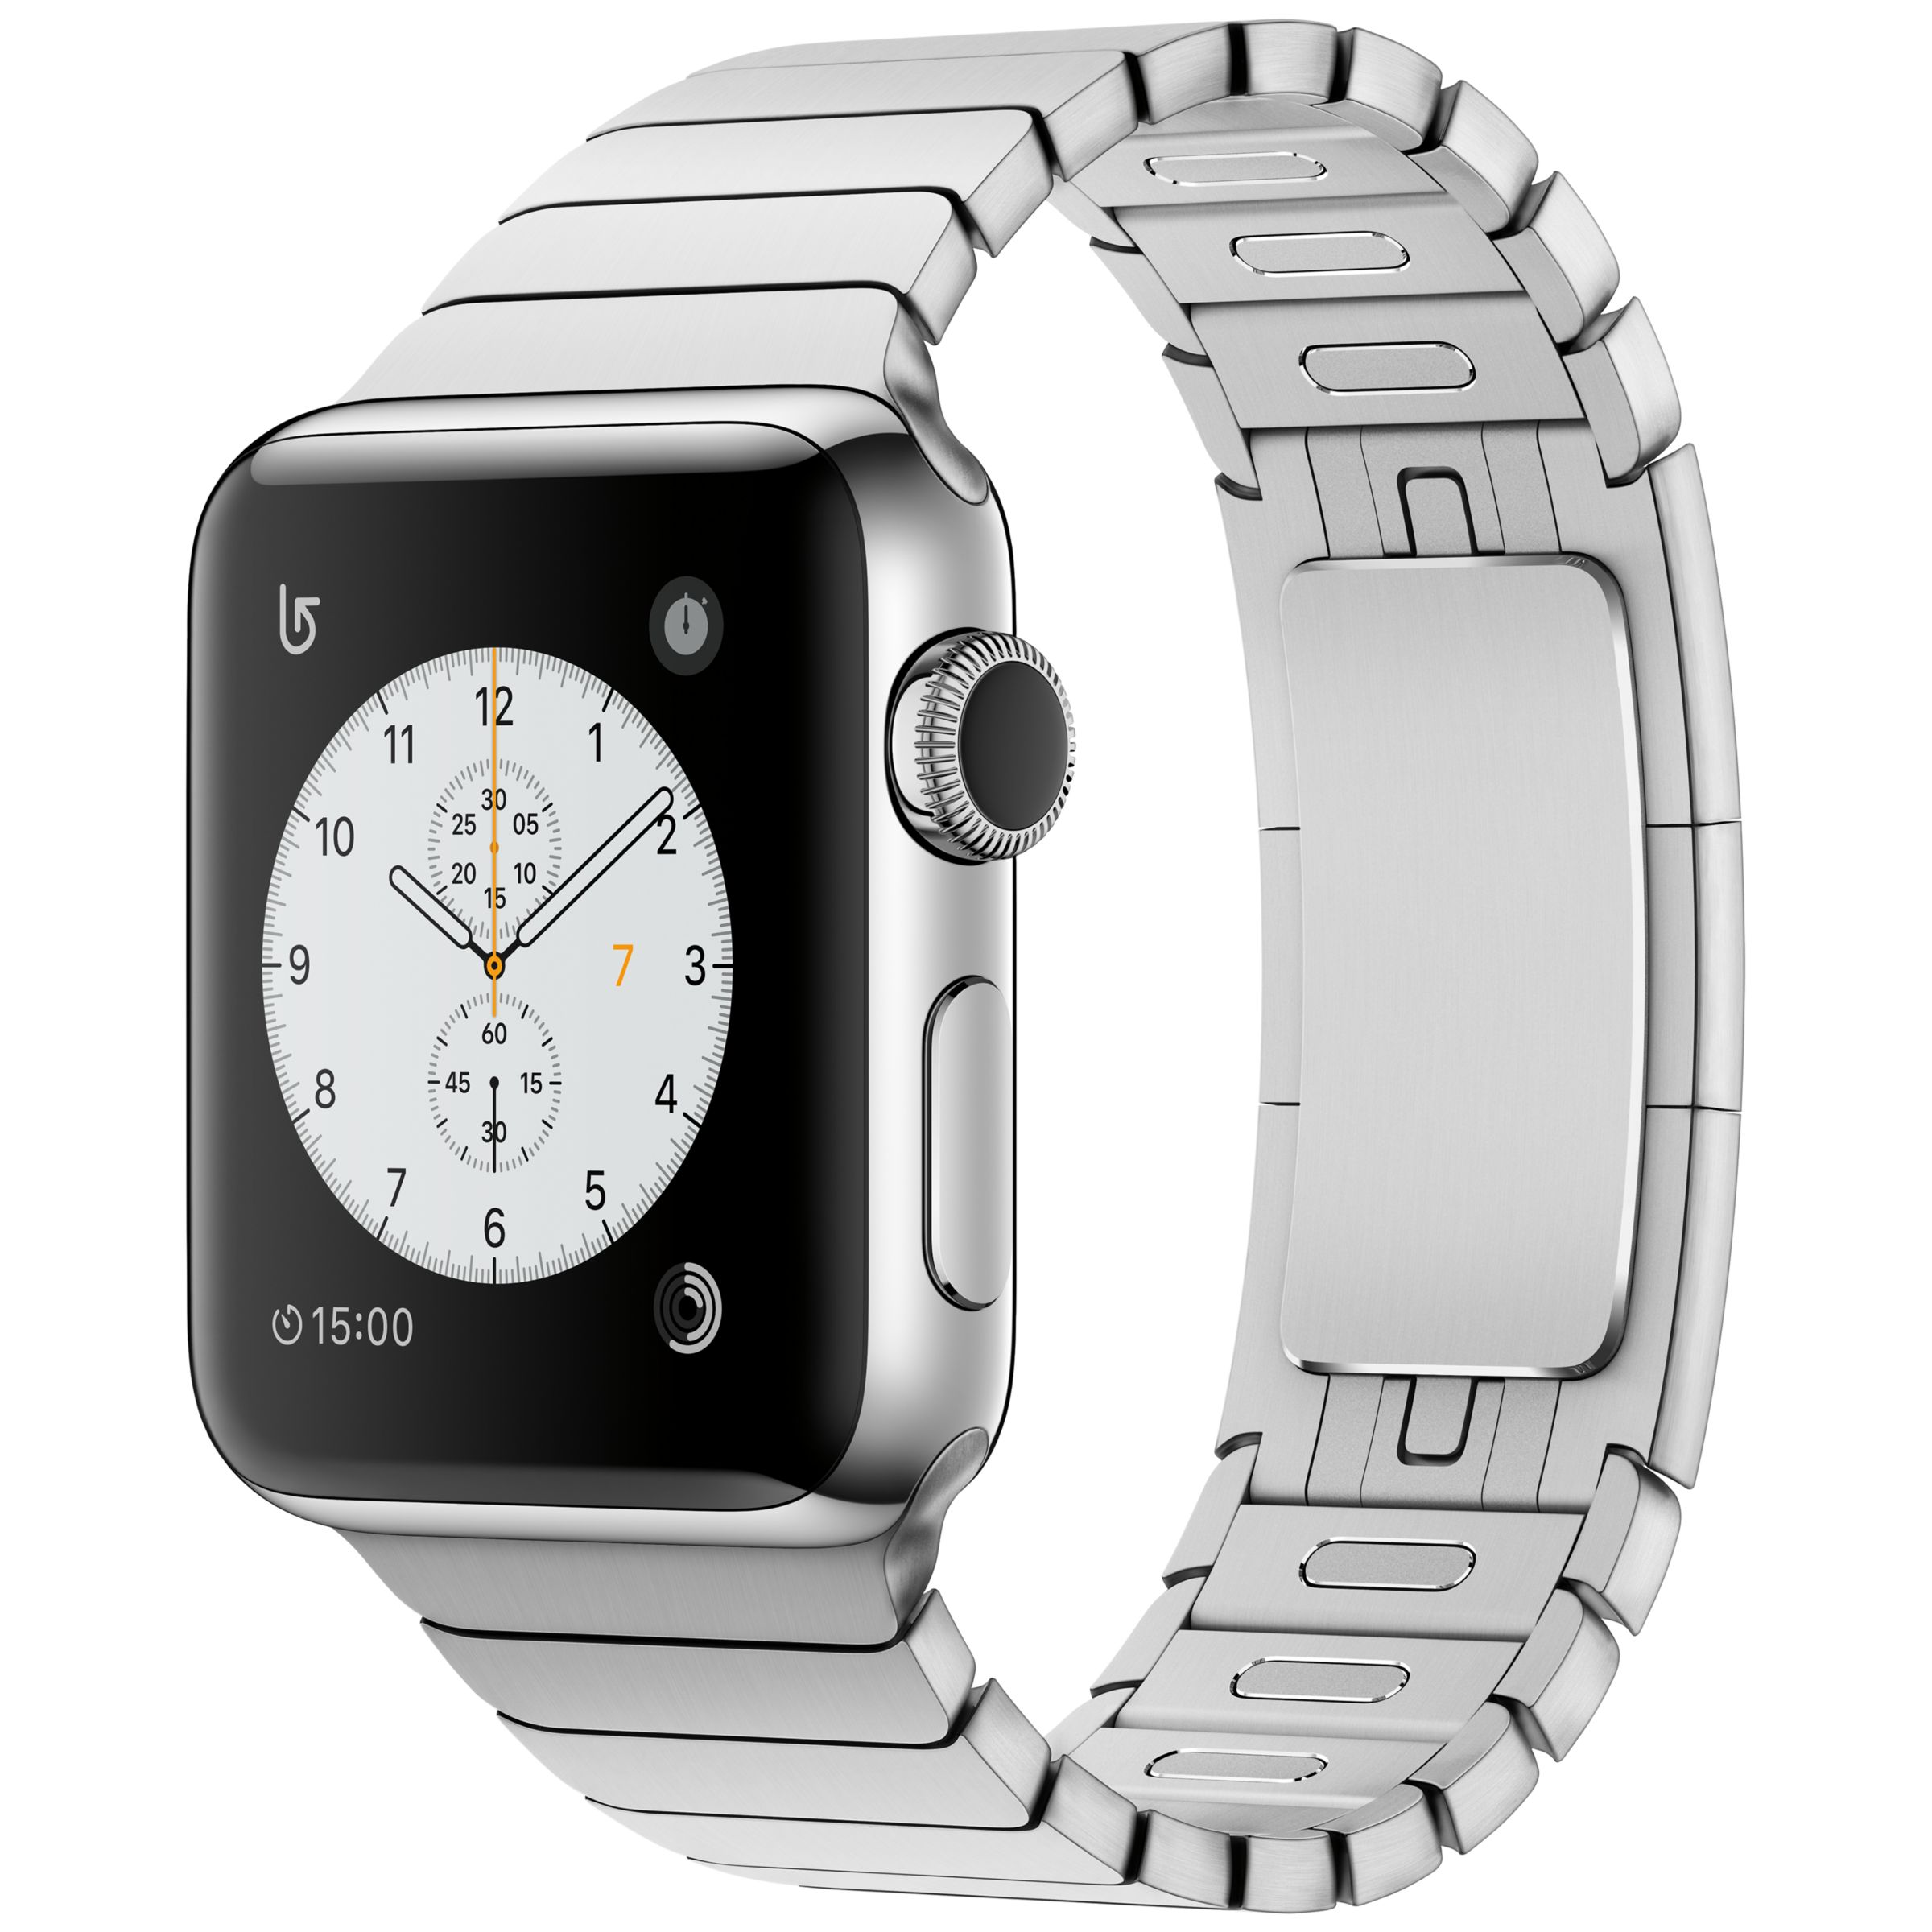 Apple Watch Series 2 38mm Stainless Steel Case with Link Bracelet, Silver